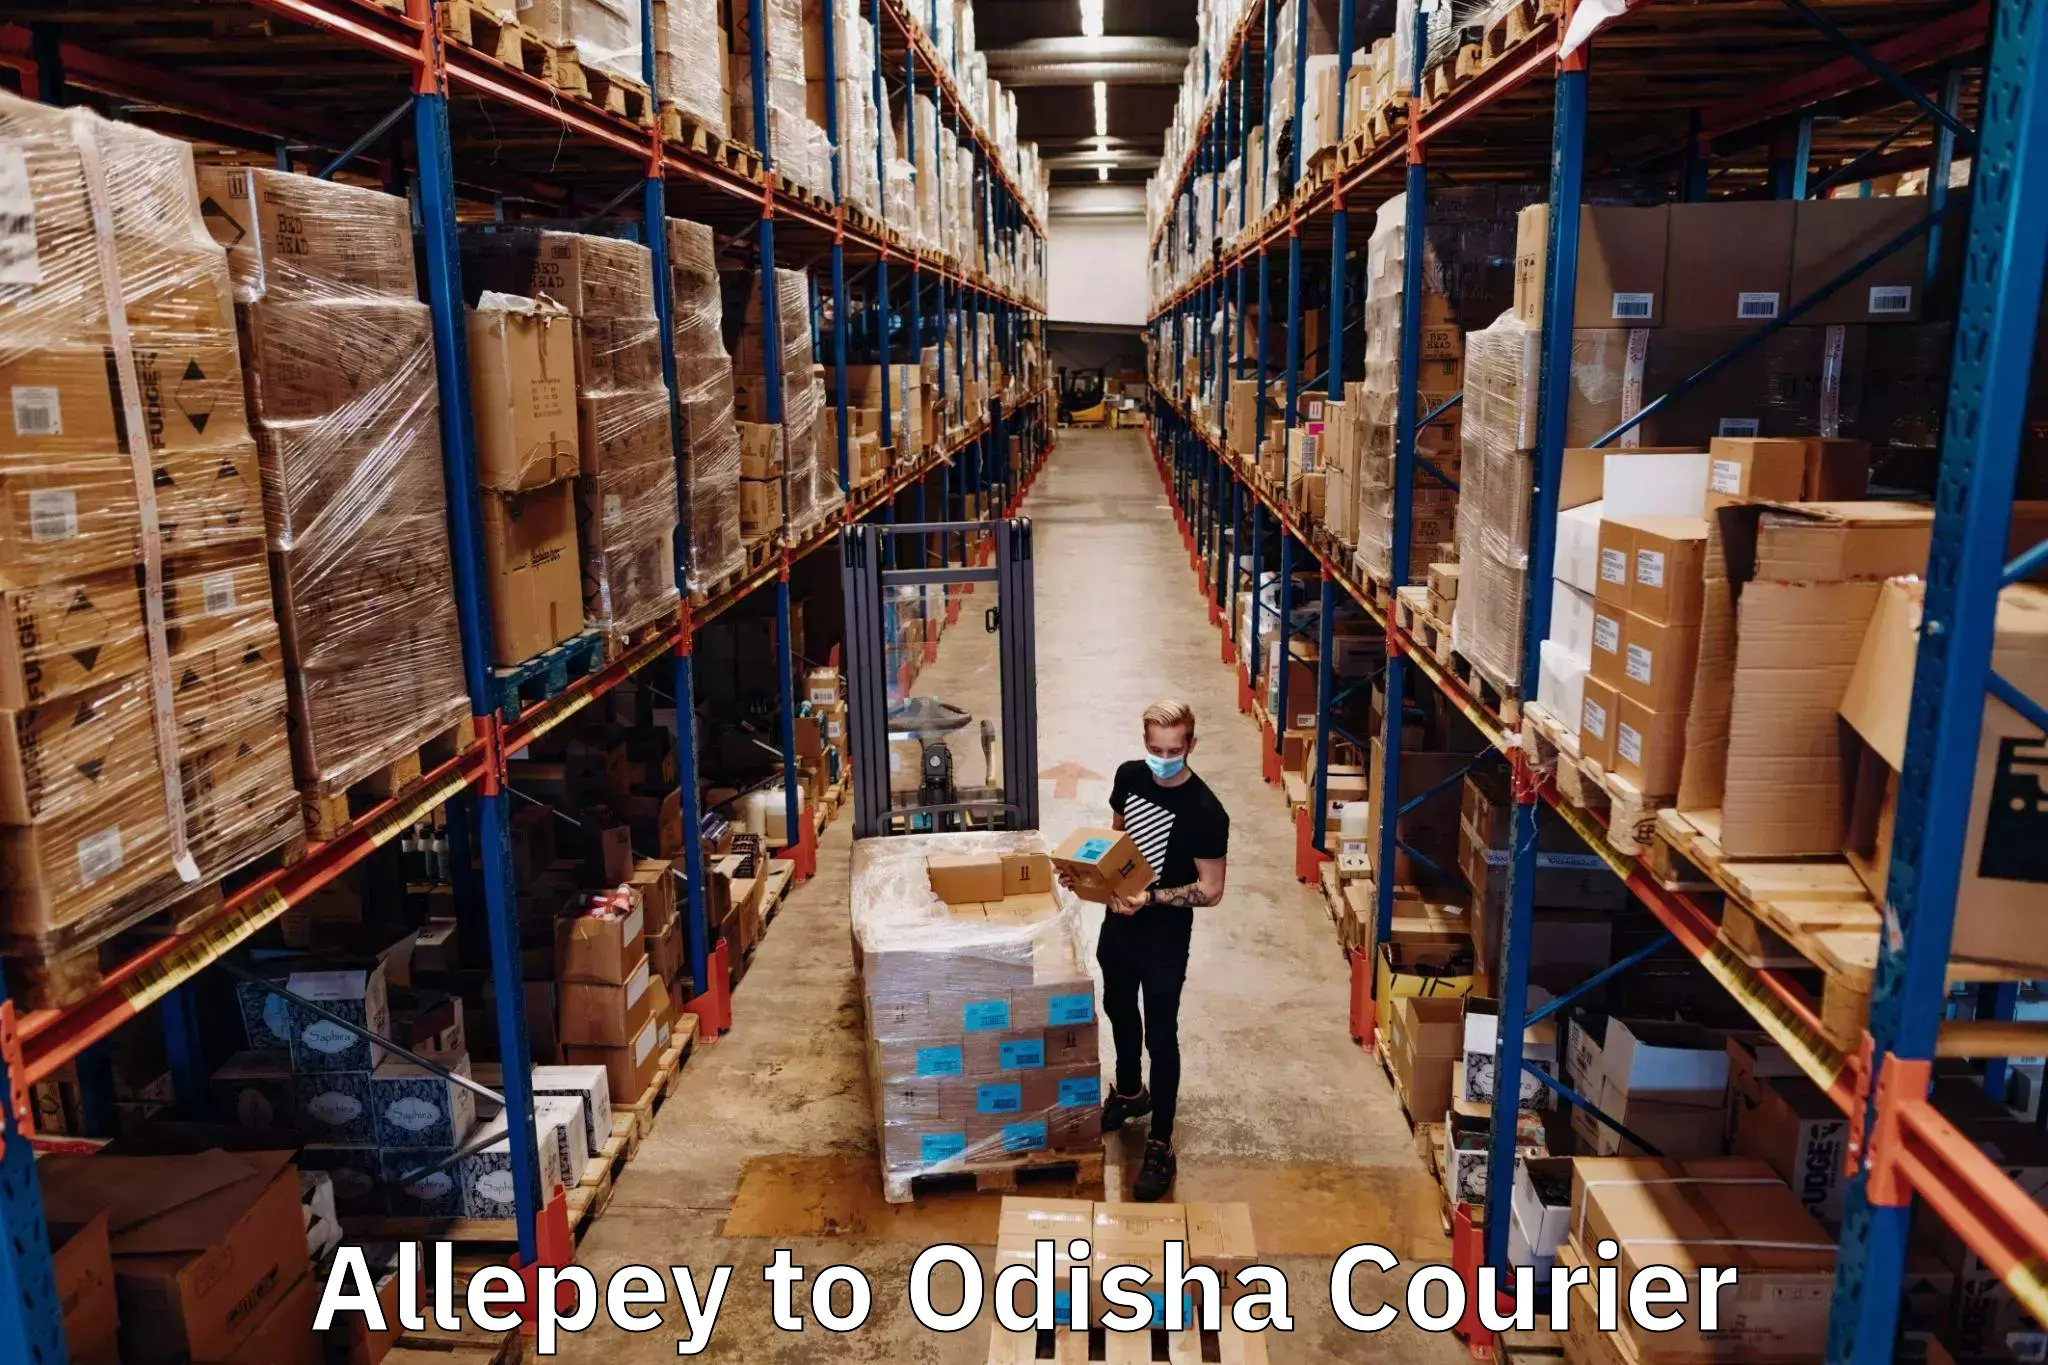 Sustainable shipping practices Allepey to Mathili